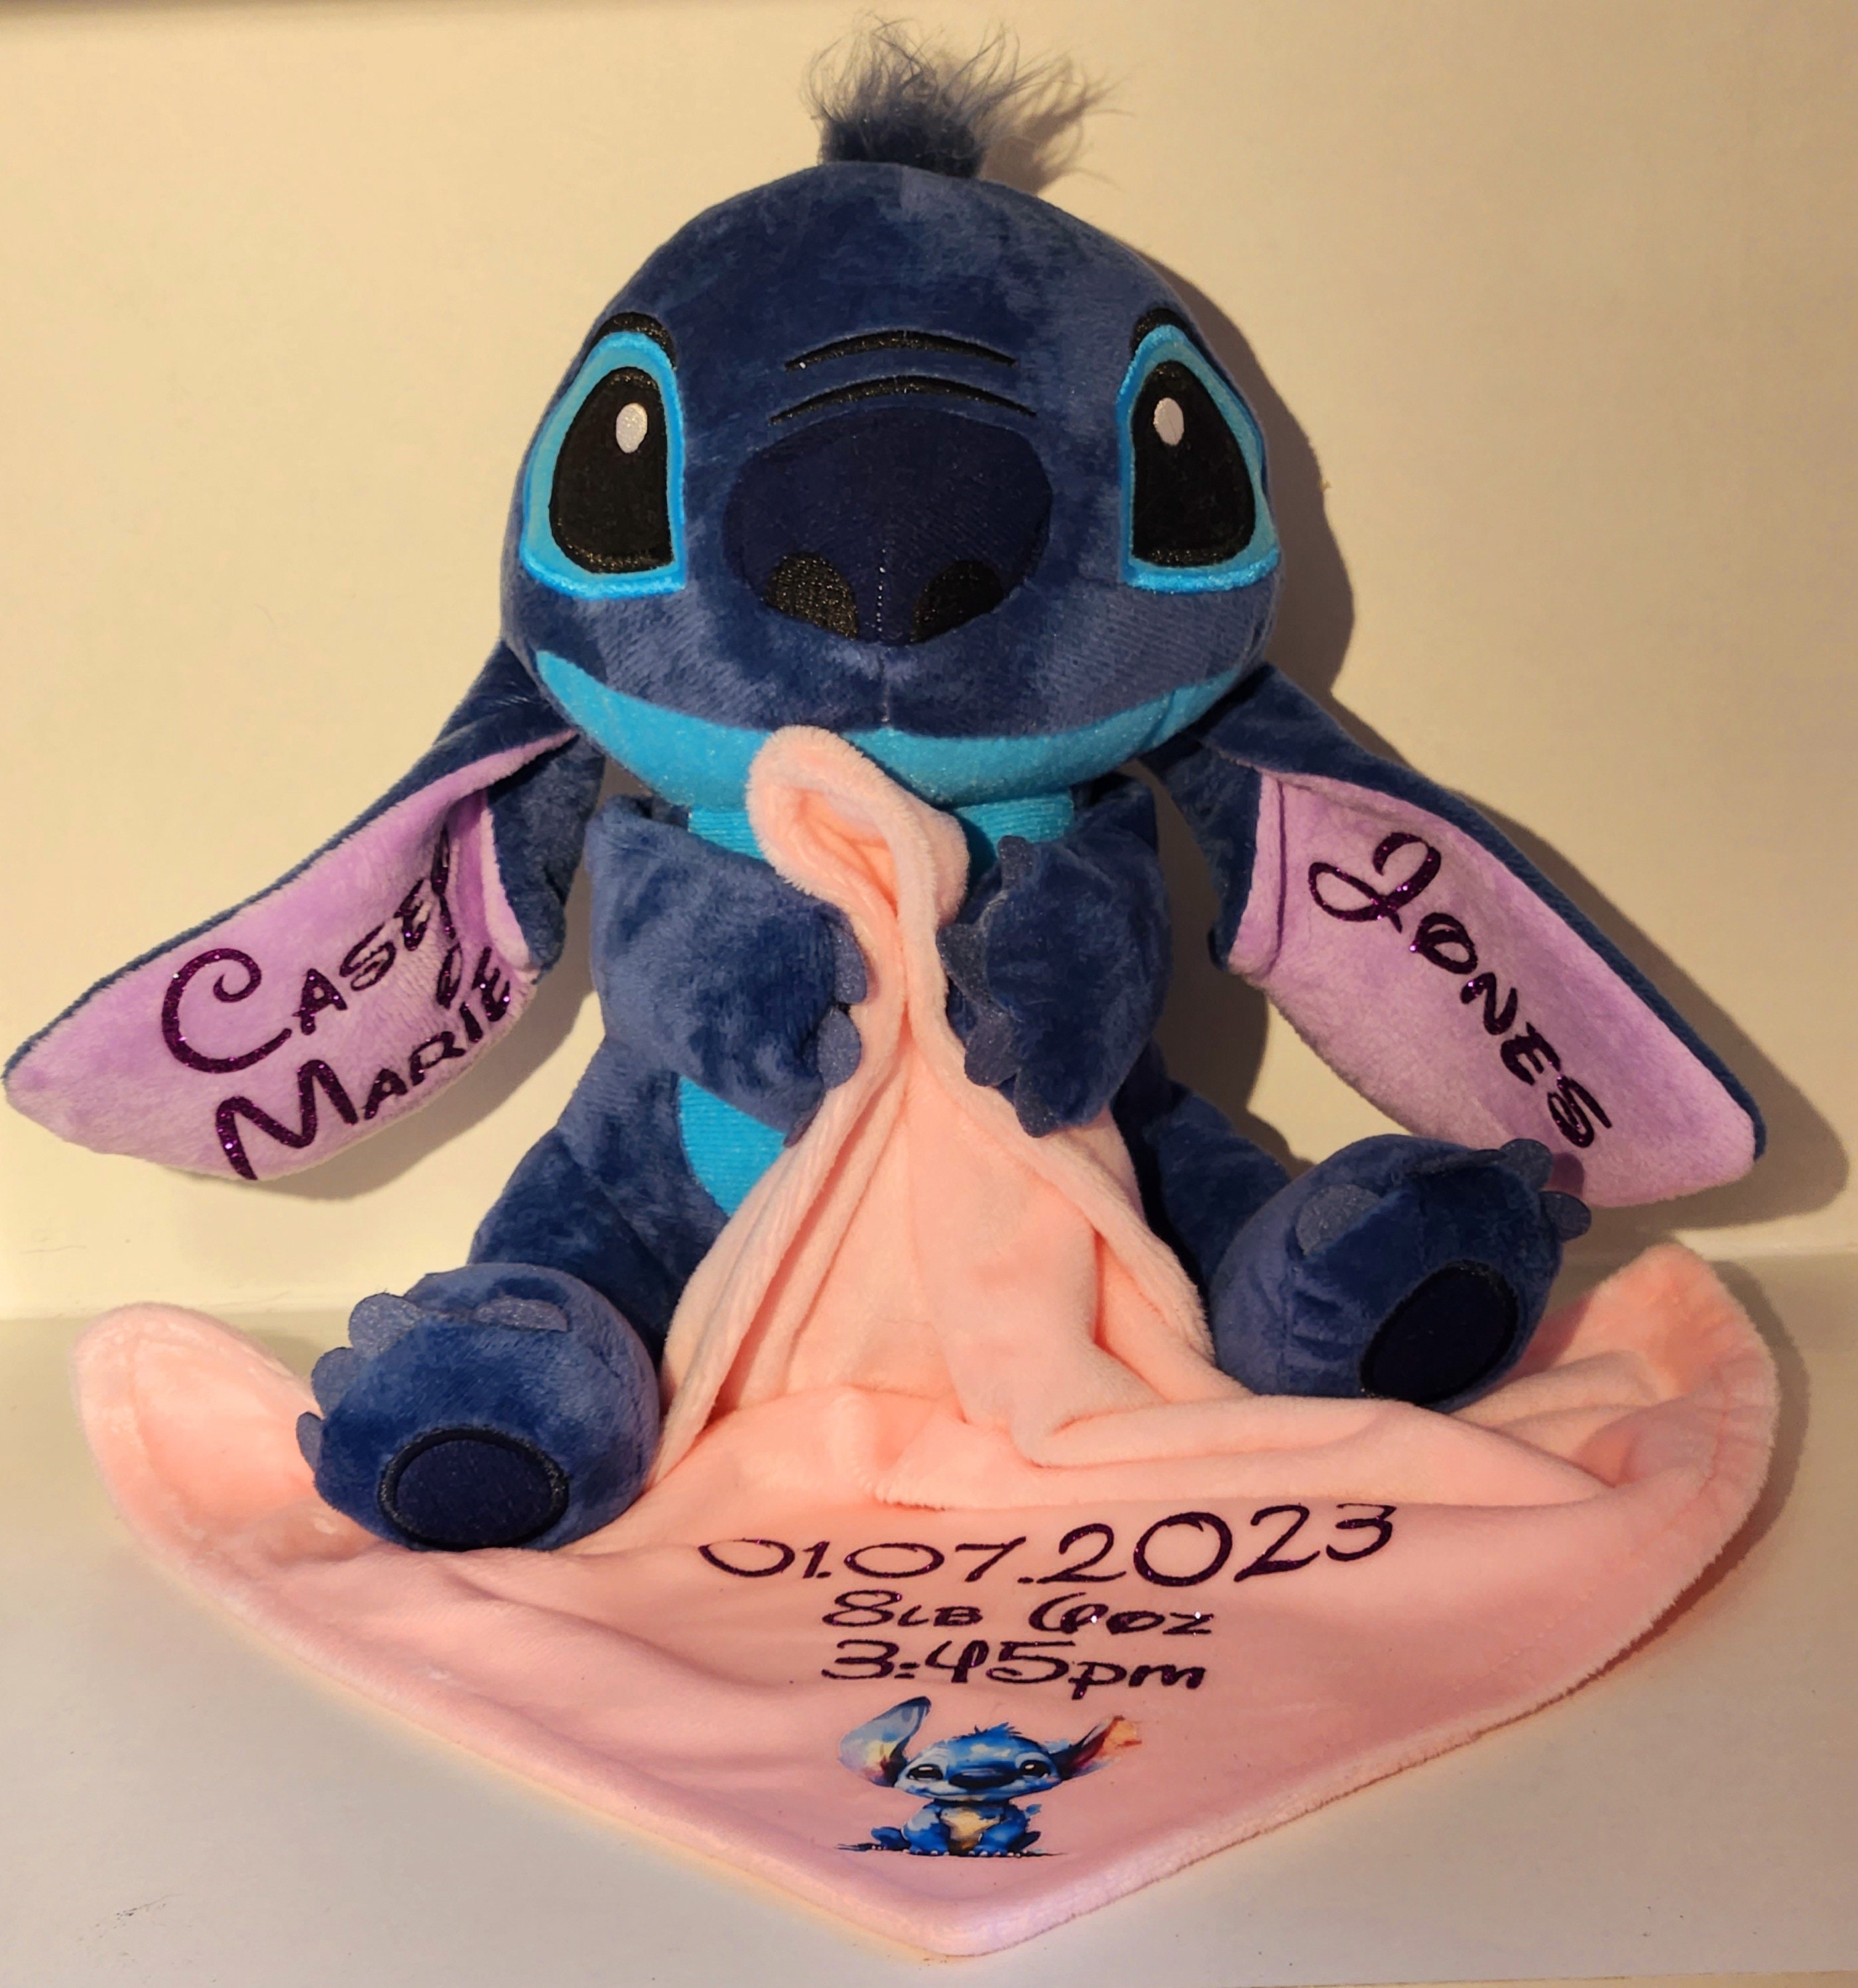 Lilo and stitch toys • Compare & find best price now »